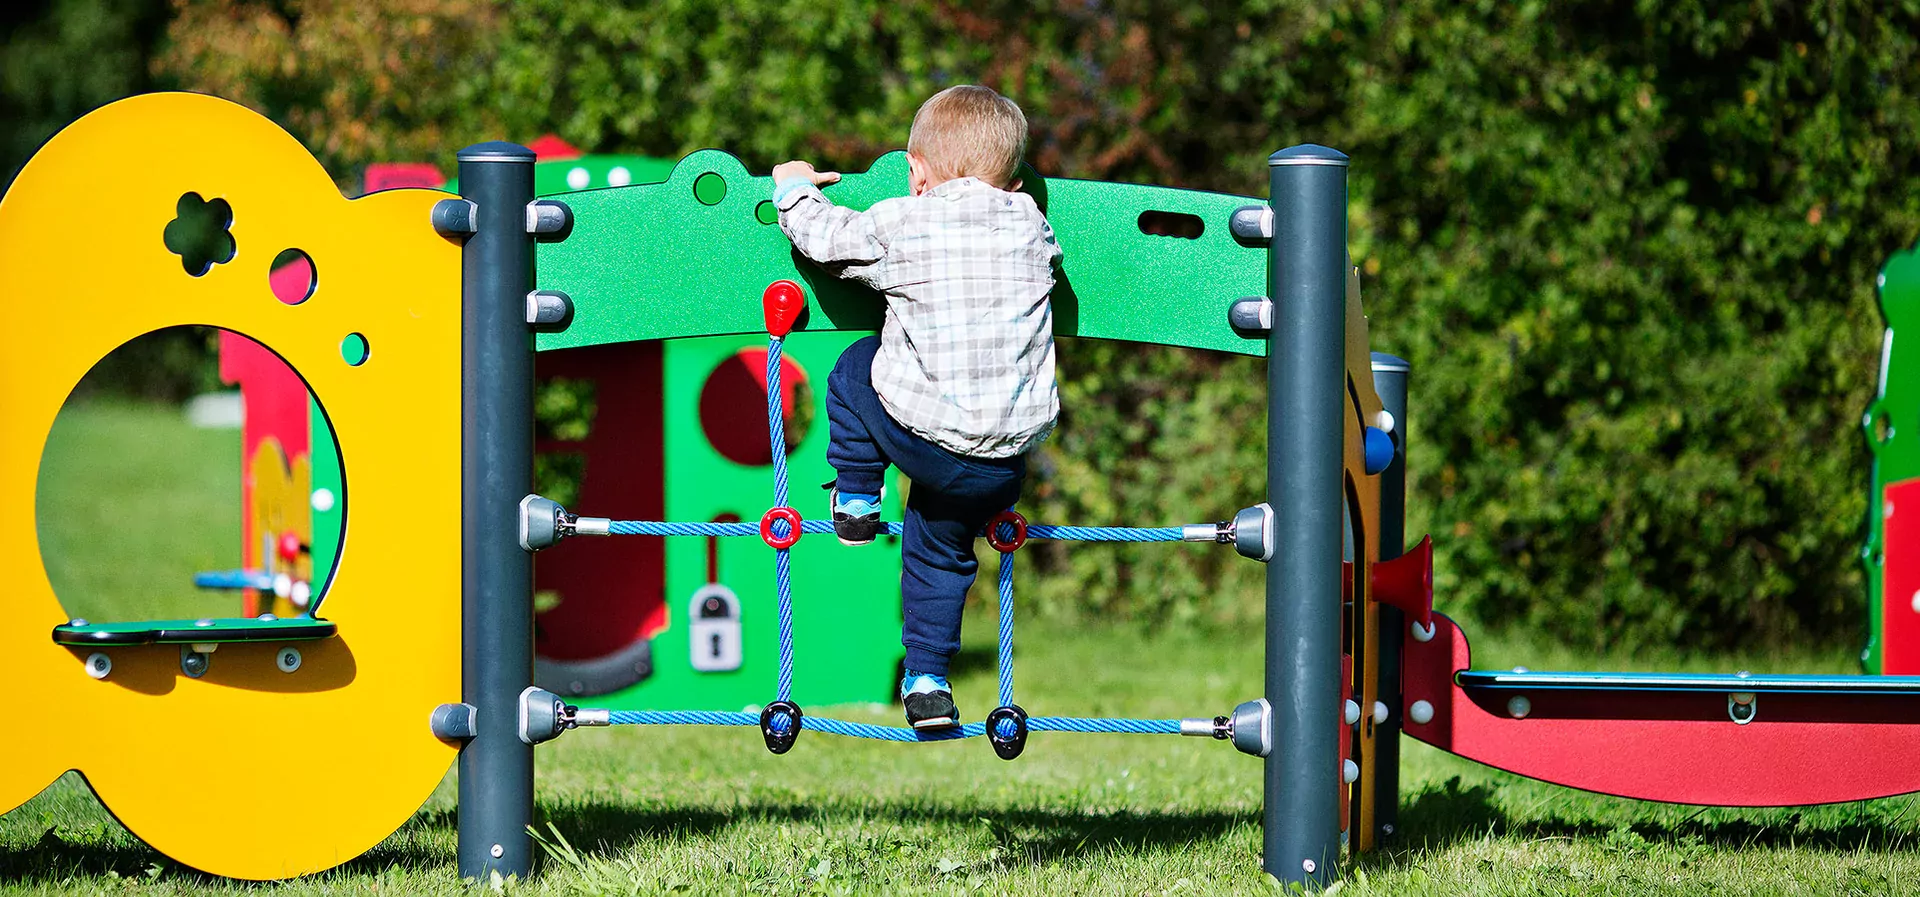 hero of a boy climbing on a colourful toddler play system